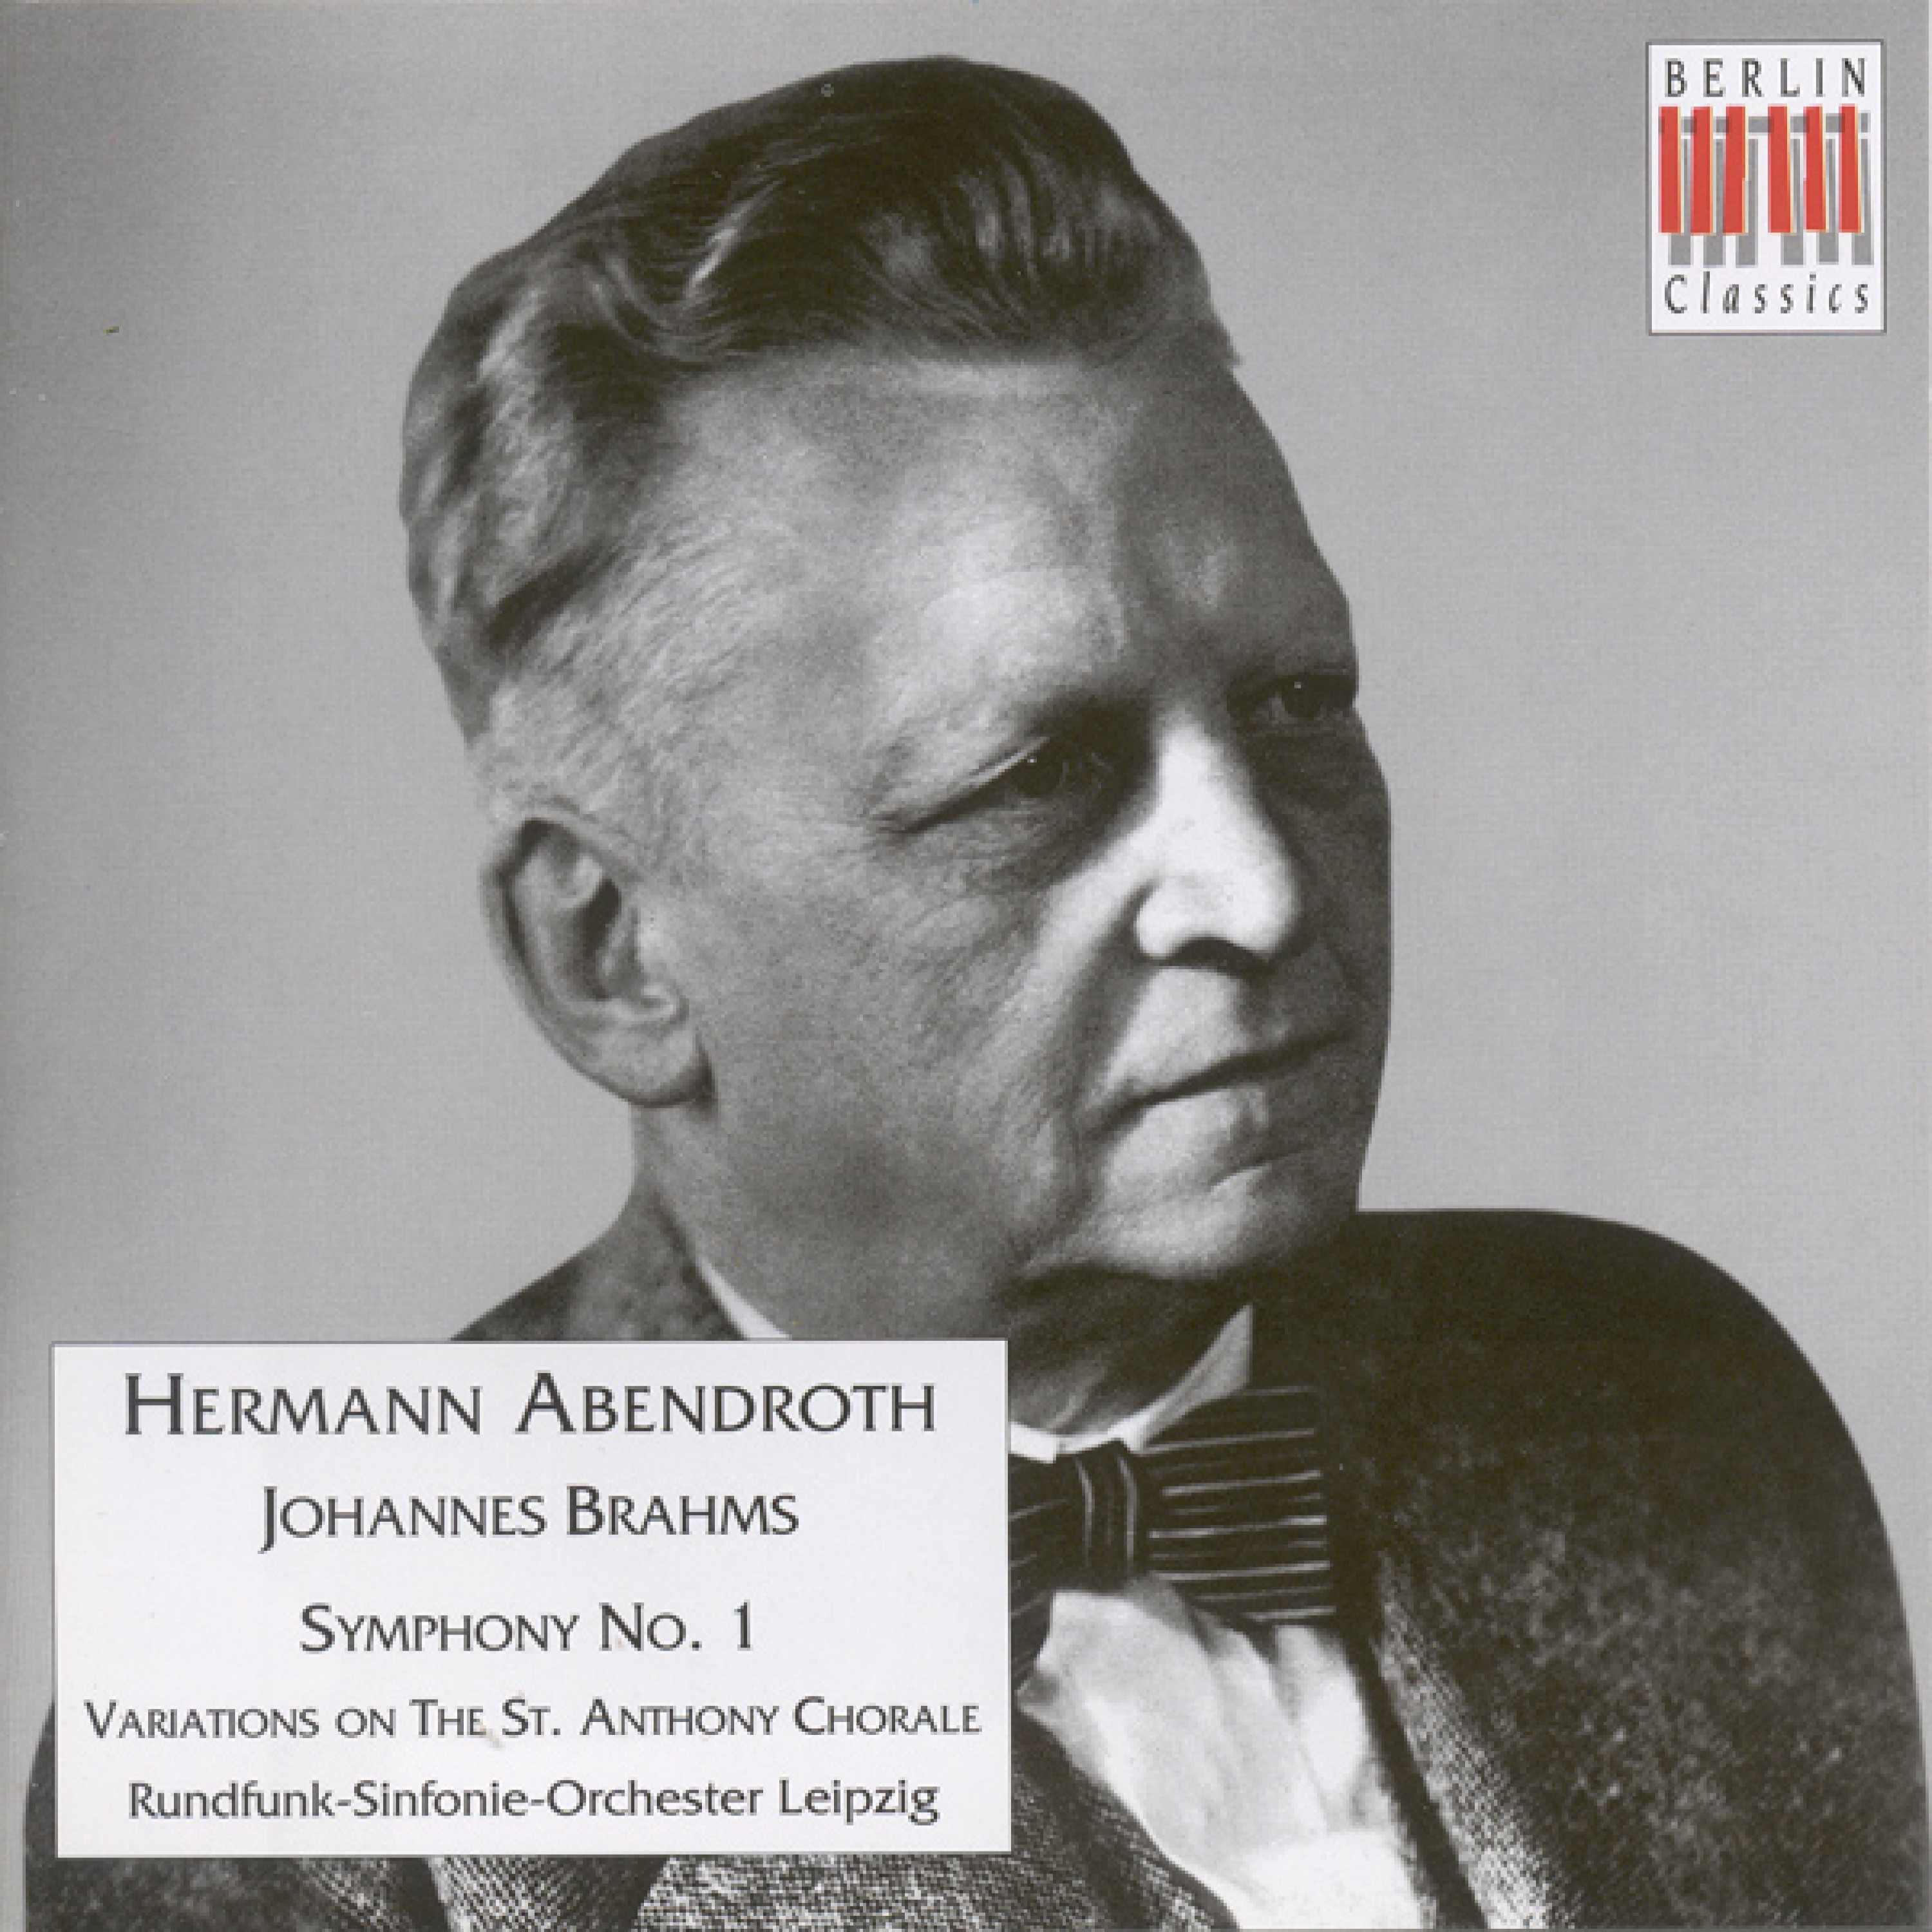 Variations on a Theme by Haydn, Op. 56a, "St. Anthony Variations": Variation 7: Grazioso